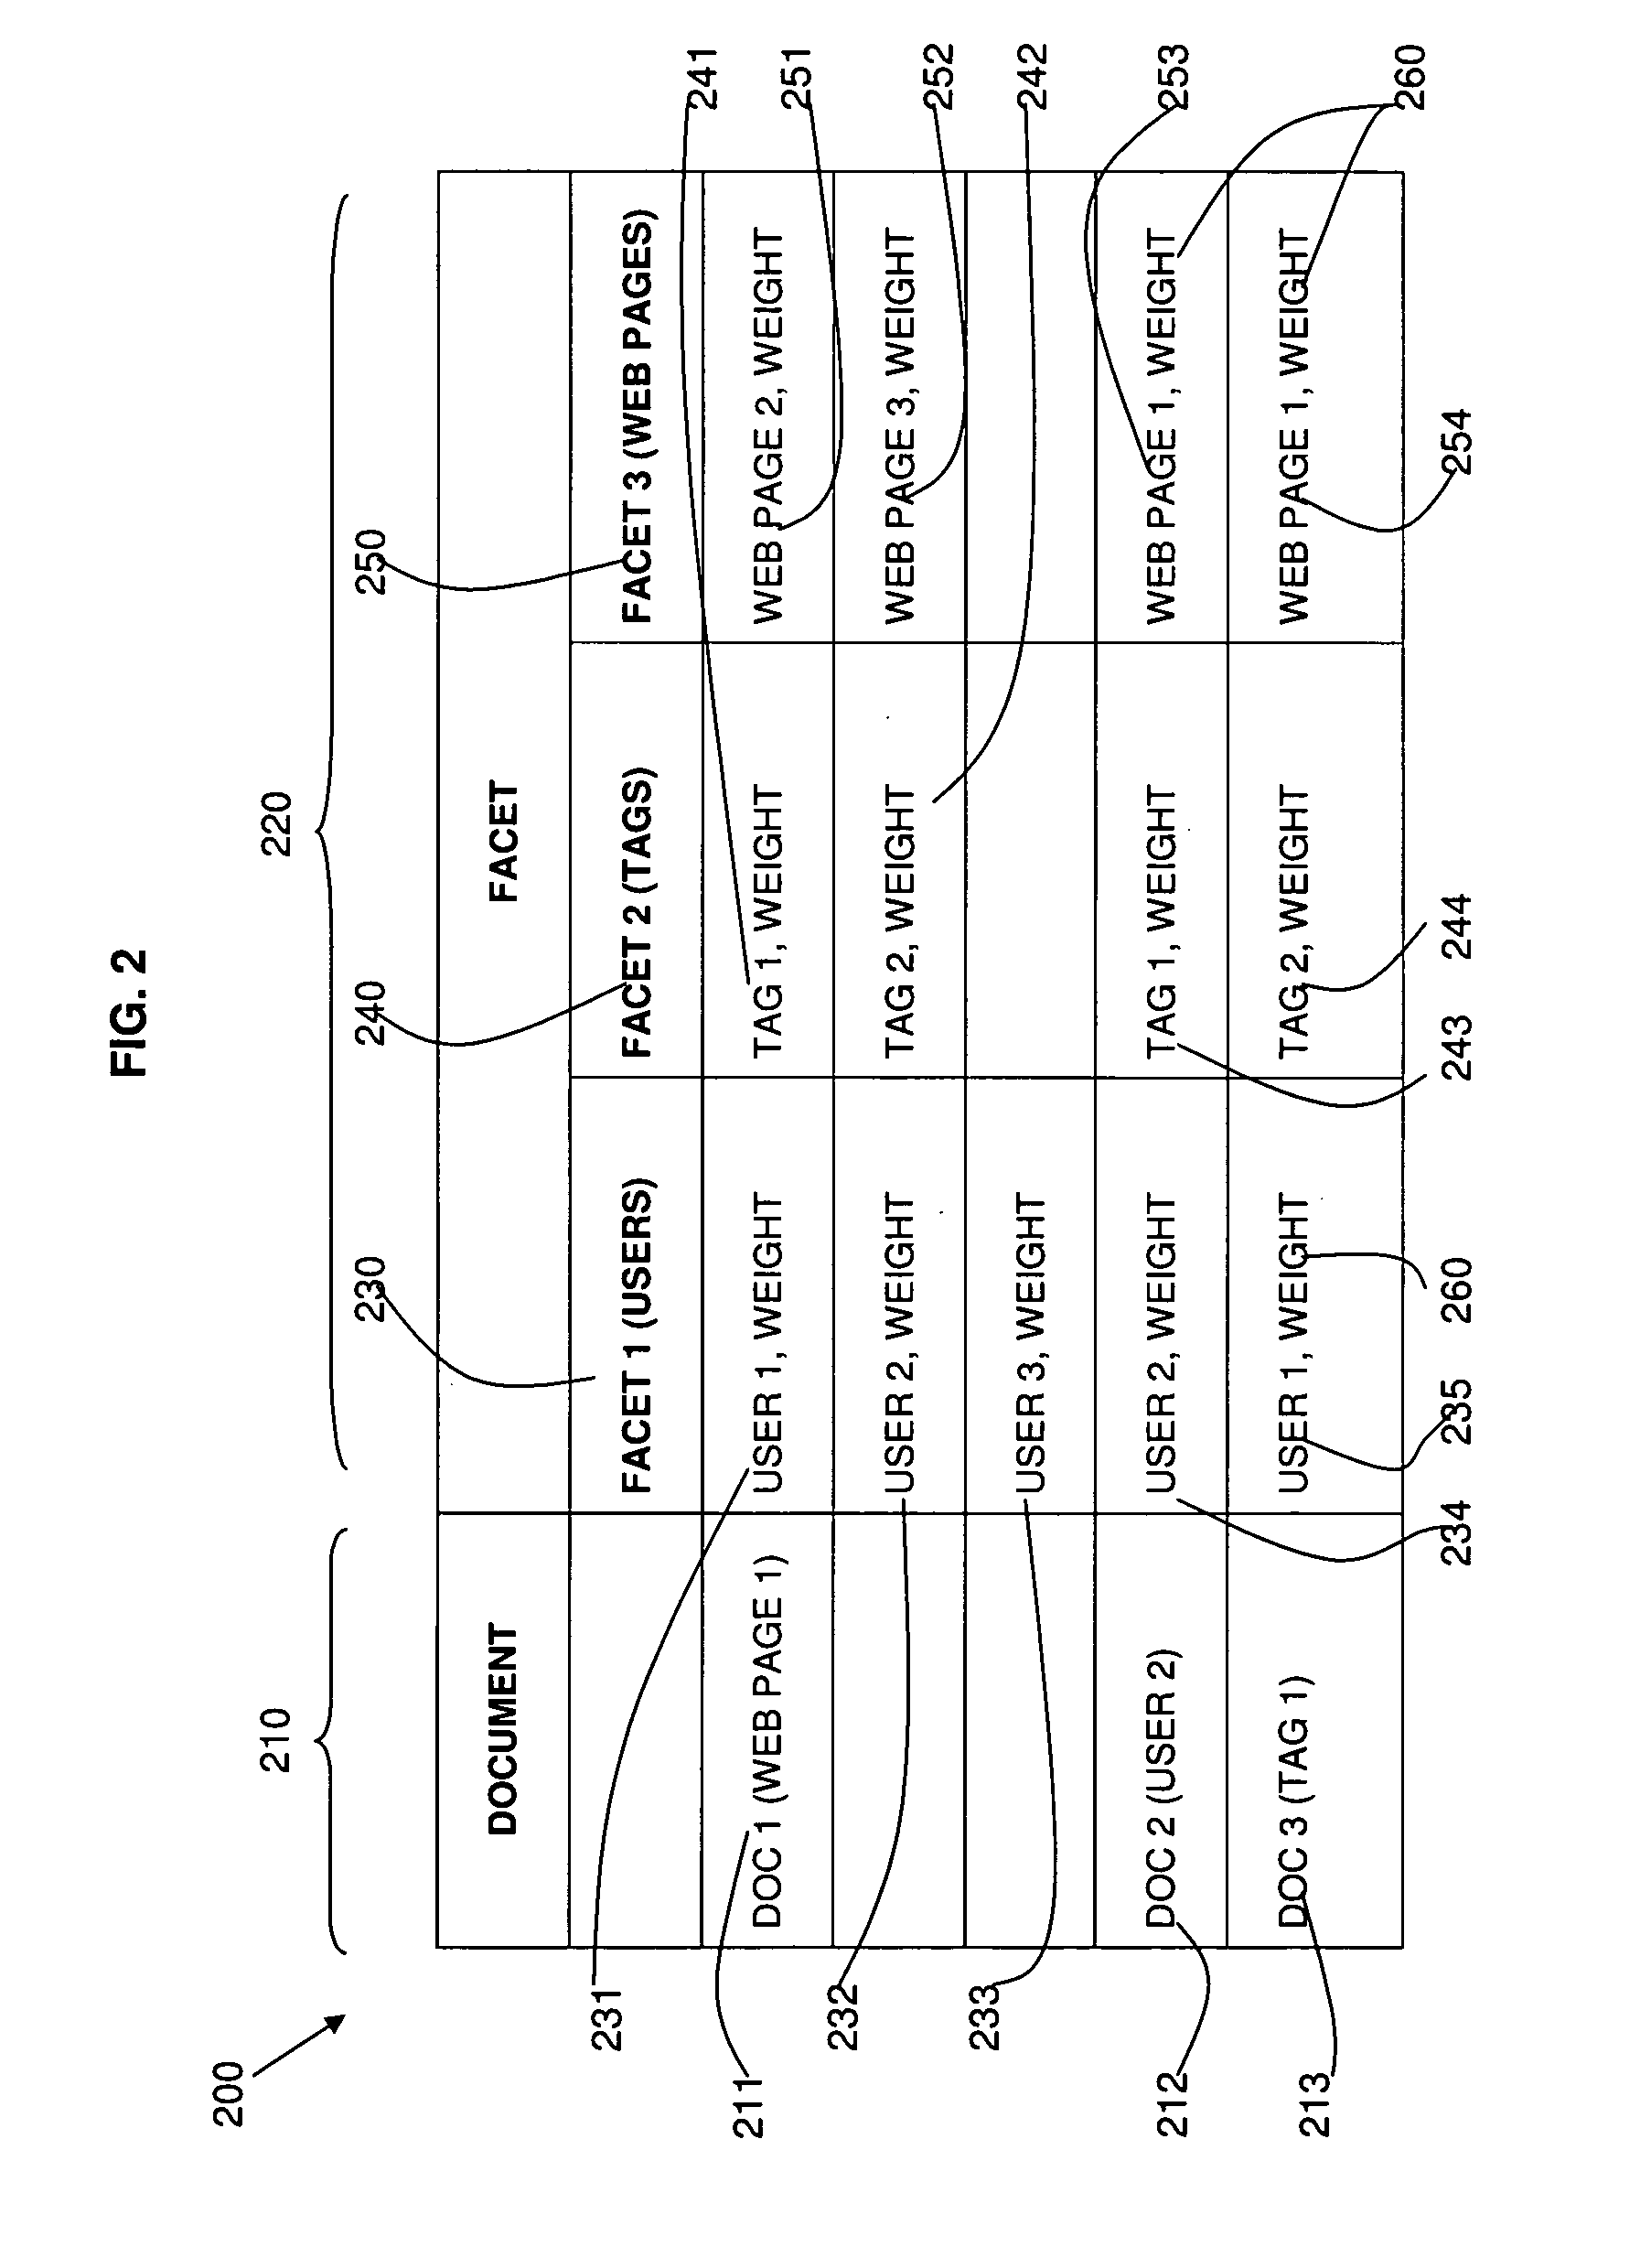 Information Retrieval with Unified Search Using Multiple Facets